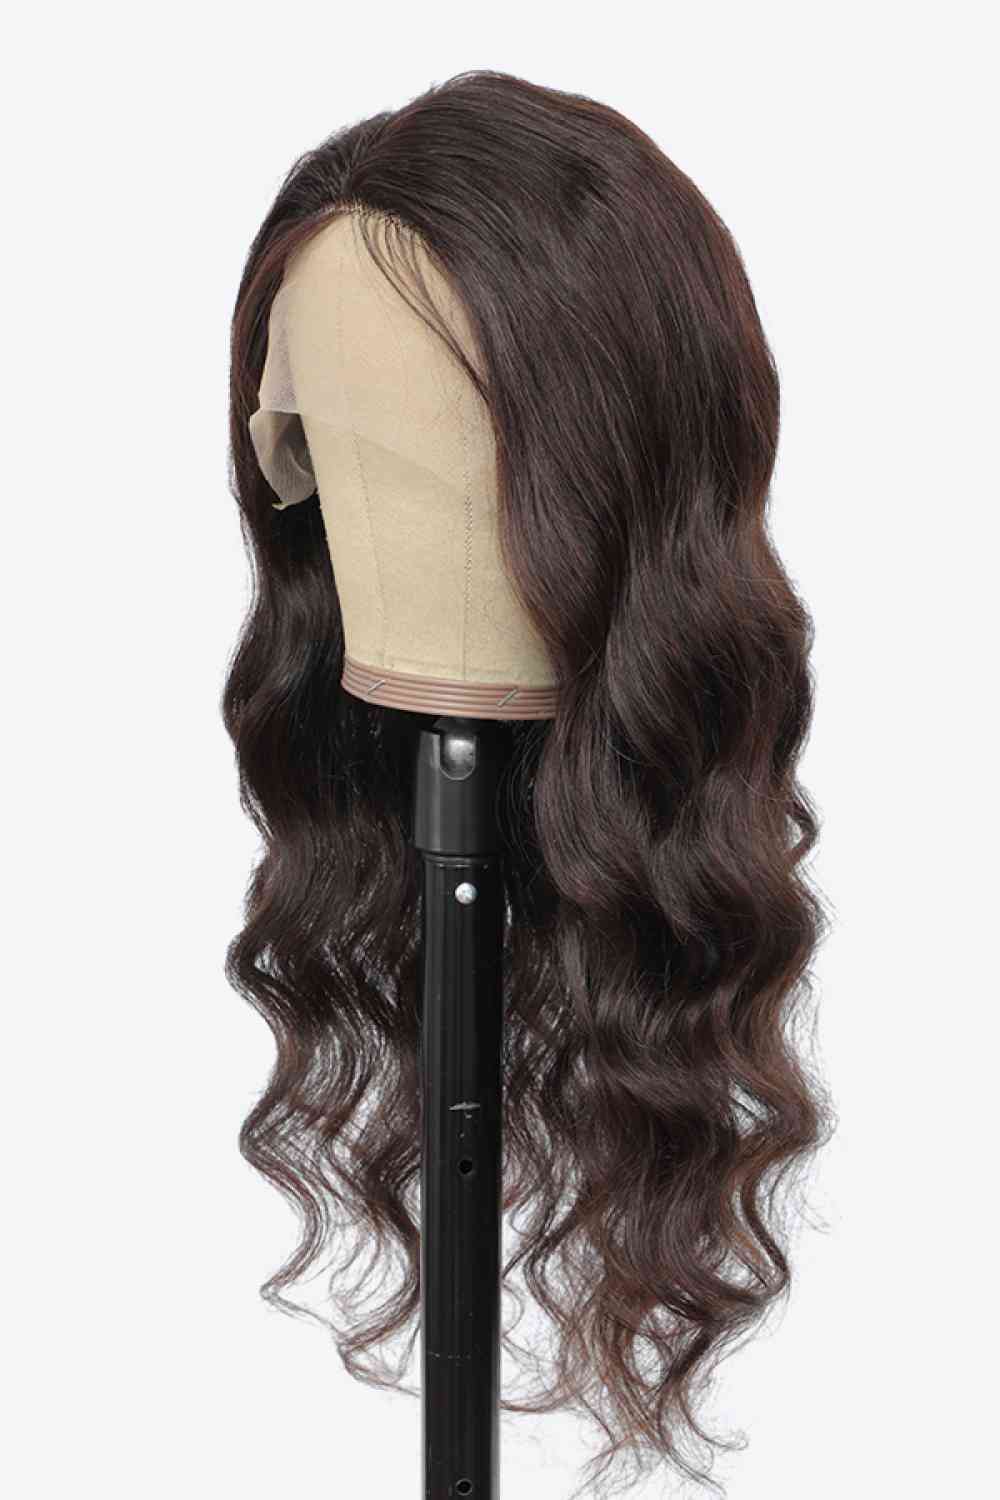 20" 13x4 Lace Front Wigs Body Wave Human Virgin Hair Natural Color 150% Density - lolaluxeshop